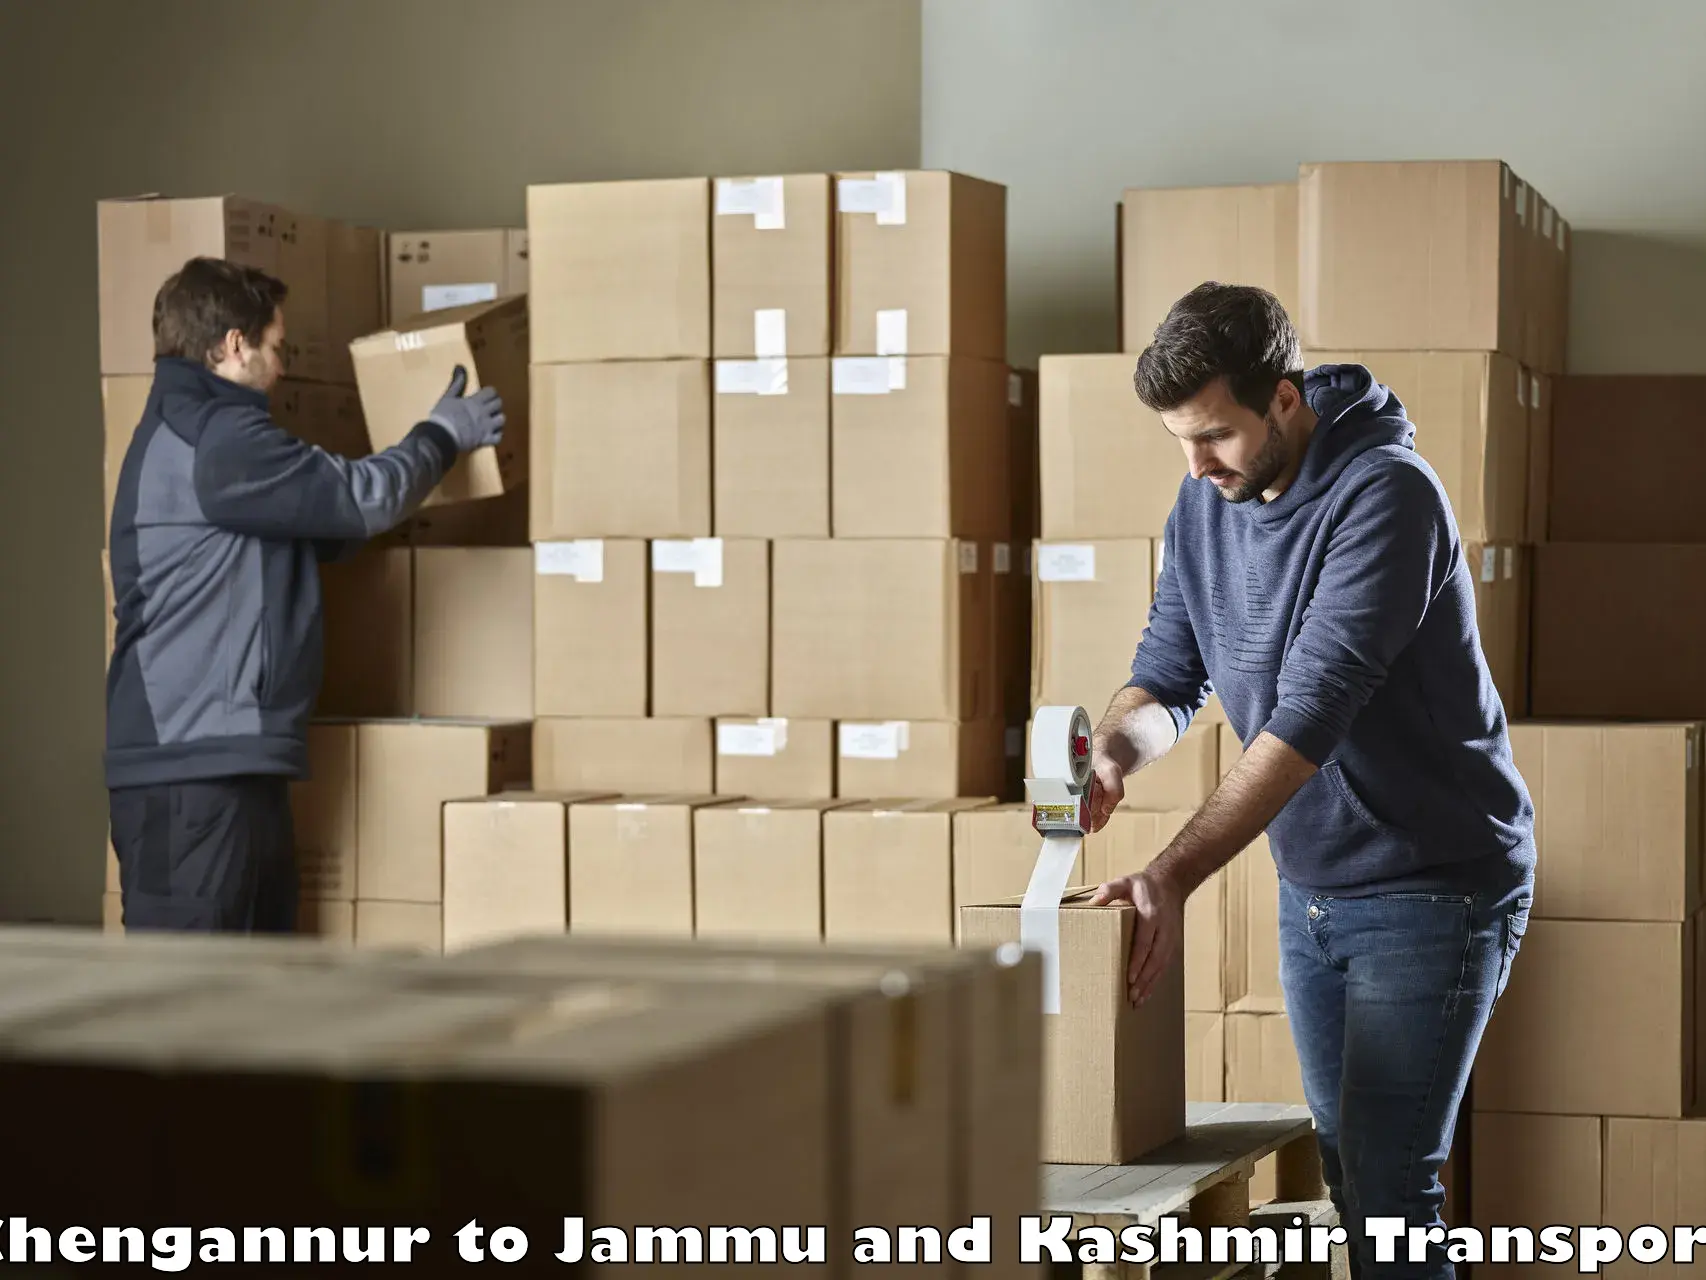 Luggage transport services in Chengannur to Baramulla